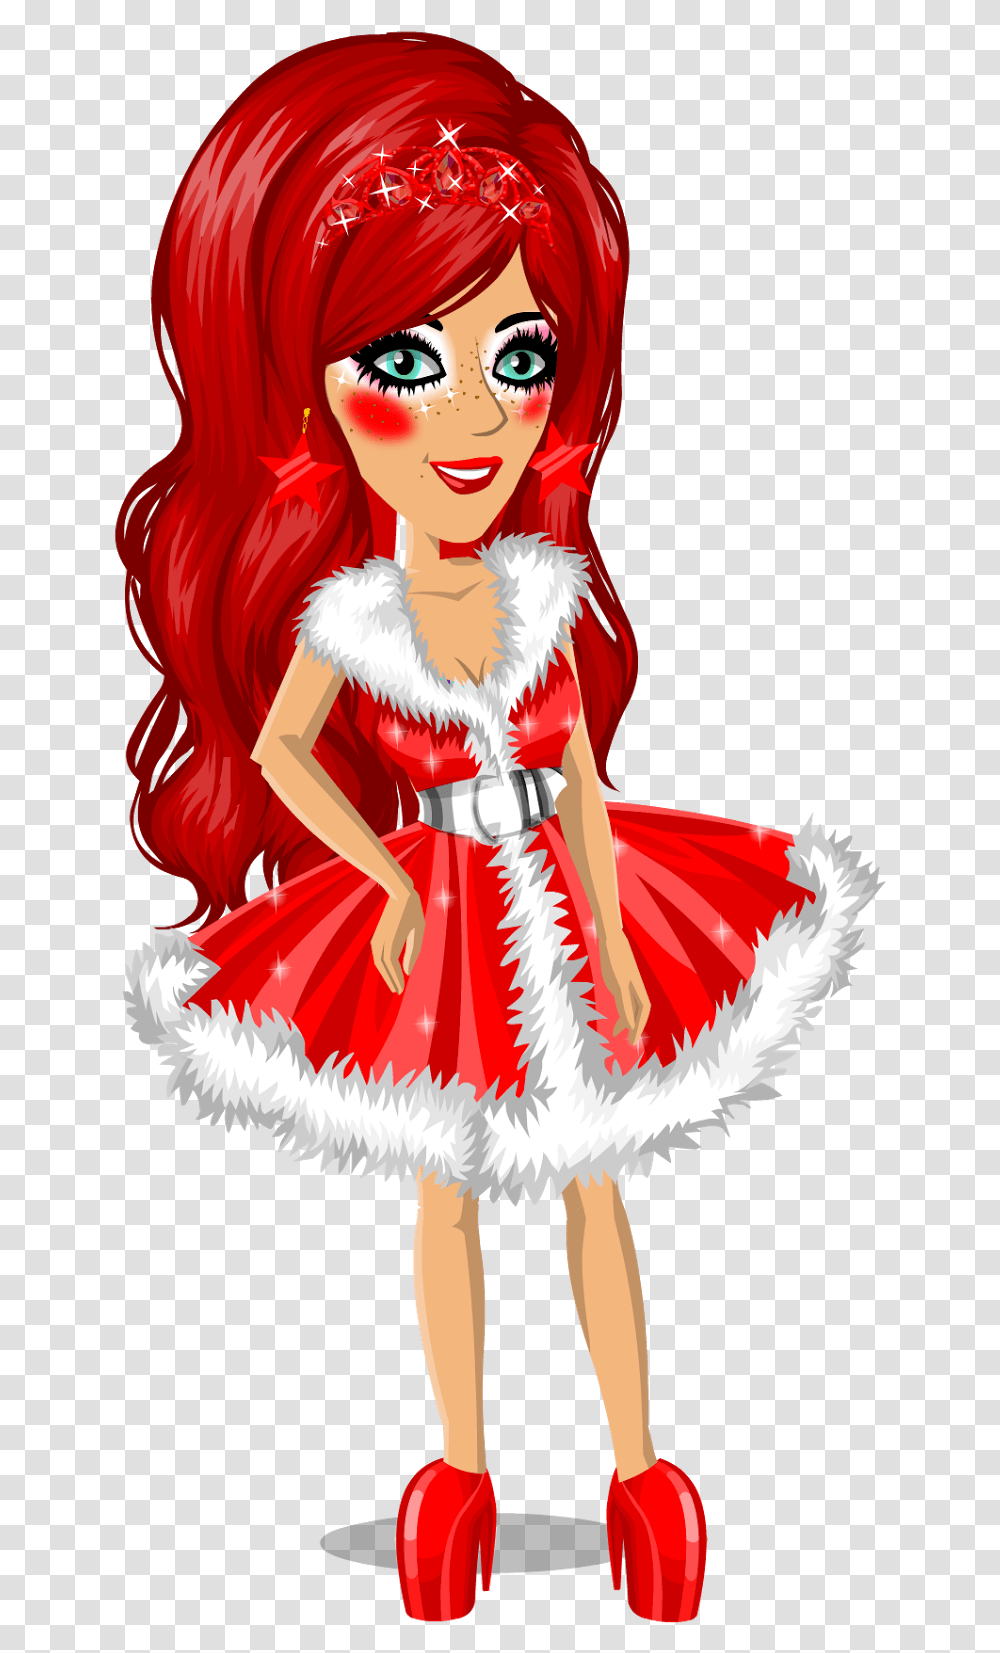 Download Hd My Msp Christmas Star Msp Character Christmas, Person, Art, Graphics, Clothing Transparent Png